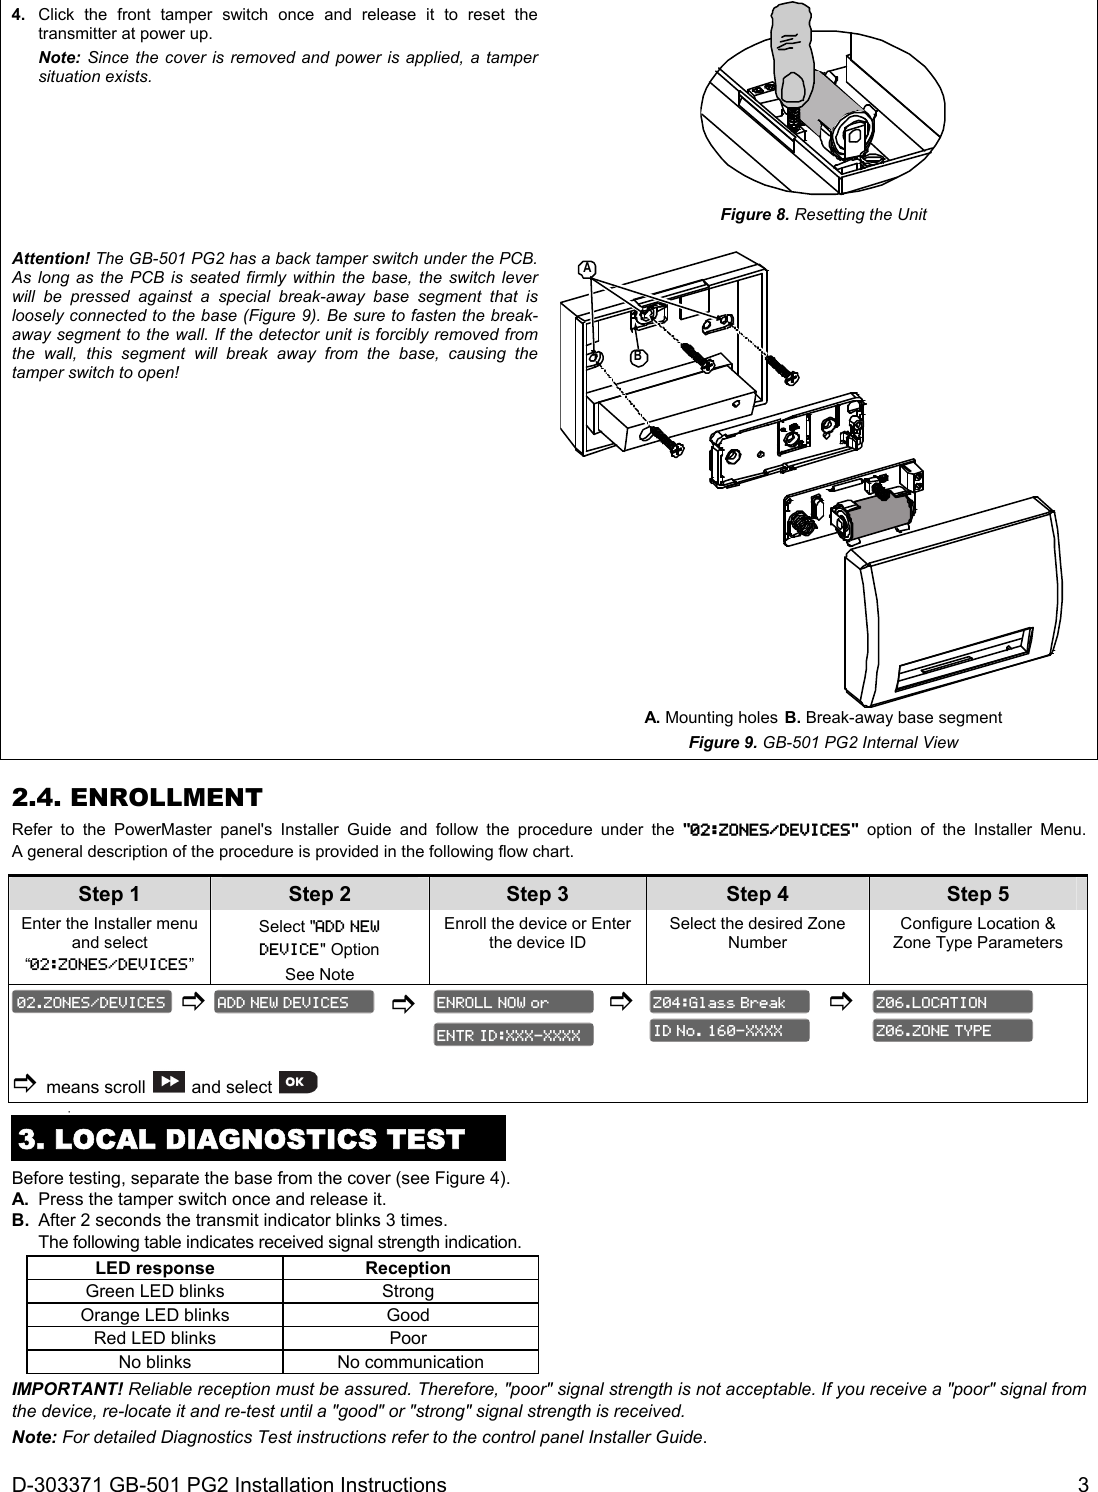 D-303371 GB-501 PG2 Installation Instructions  3     4.  Click the front tamper switch once and release it to reset the transmitter at power up.  Note: Since the cover is removed and power is applied, a tamper situation exists.  Figure 8. Resetting the Unit Attention! The GB-501 PG2 has a back tamper switch under the PCB. As long as the PCB is seated firmly within the base, the switch lever will be pressed against a special break-away base segment that is loosely connected to the base (Figure 9). Be sure to fasten the break-away segment to the wall. If the detector unit is forcibly removed from the wall, this segment will break away from the base, causing the tamper switch to open! BA A. Mounting holes B. Break-away base segment Figure 9. GB-501 PG2 Internal View 2.4. ENROLLMENT Refer to the PowerMaster panel&apos;s Installer Guide and follow the procedure under the &quot;02:ZONES/DEVICES&quot; option of the Installer Menu. A general description of the procedure is provided in the following flow chart. Step 1 Step 2 Step 3 Step 4   Step 5 Enter the Installer menu and select “02:ZONES/DEVICES” Select &quot;ADD NEW  DEVICE&quot; Option  See Note Enroll the device or Enter the device ID Select the desired Zone Number Configure Location &amp; Zone Type Parameters         means scroll  and select               3. LOCAL DIAGNOSTICS TEST Before testing, separate the base from the cover (see Figure 4). A.  Press the tamper switch once and release it.  B.  After 2 seconds the transmit indicator blinks 3 times.  The following table indicates received signal strength indication. LED response Reception  Green LED blinks Strong  Orange LED blinks Good  Red LED blinks Poor  No blinks No communication IMPORTANT! Reliable reception must be assured. Therefore, &quot;poor&quot; signal strength is not acceptable. If you receive a &quot;poor&quot; signal from the device, re-locate it and re-test until a &quot;good&quot; or &quot;strong&quot; signal strength is received. Note: For detailed Diagnostics Test instructions refer to the control panel Installer Guide. Z06.ZONE TYPE Z06.LOCATION ID No. 160-XXXX Z04:Glass Break ENTR ID:XXX-XXXX ENROLL NOW or ADD NEW DEVICES 02.ZONES/DEVICES 